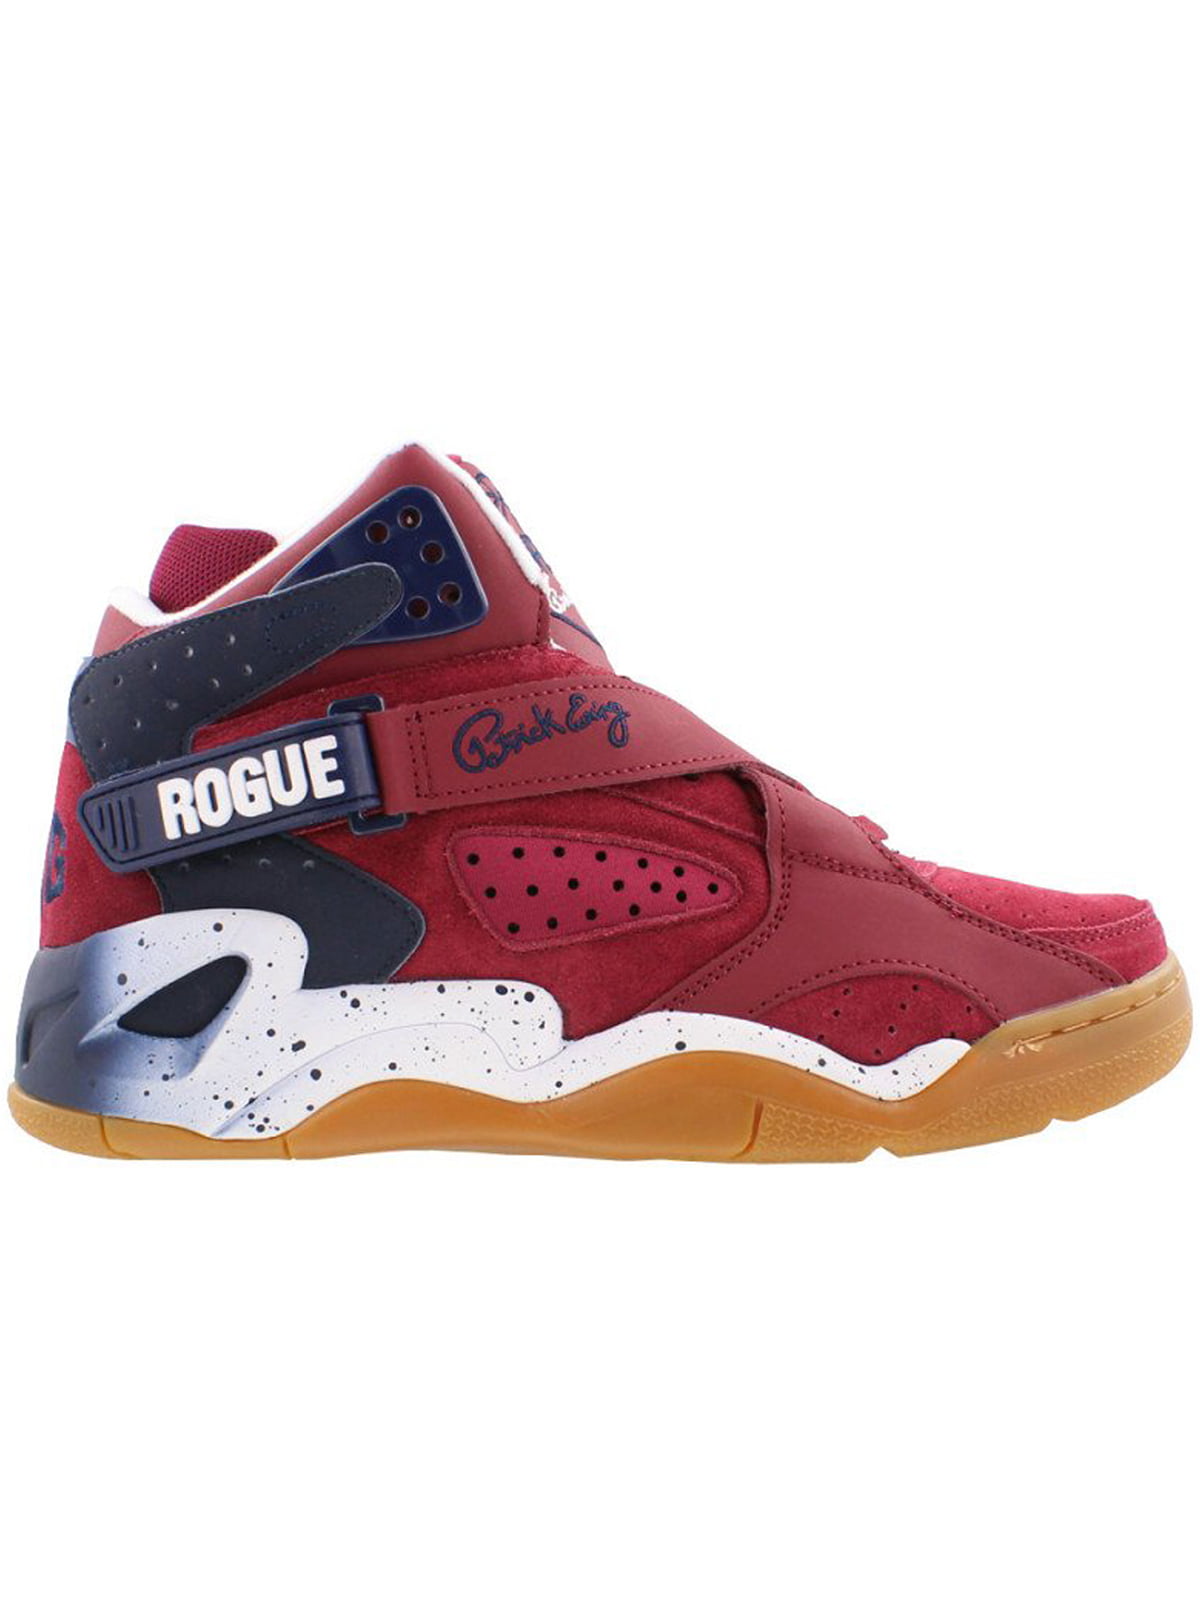 Patrick Ewing Shoes 15 Men Athletic Red White 